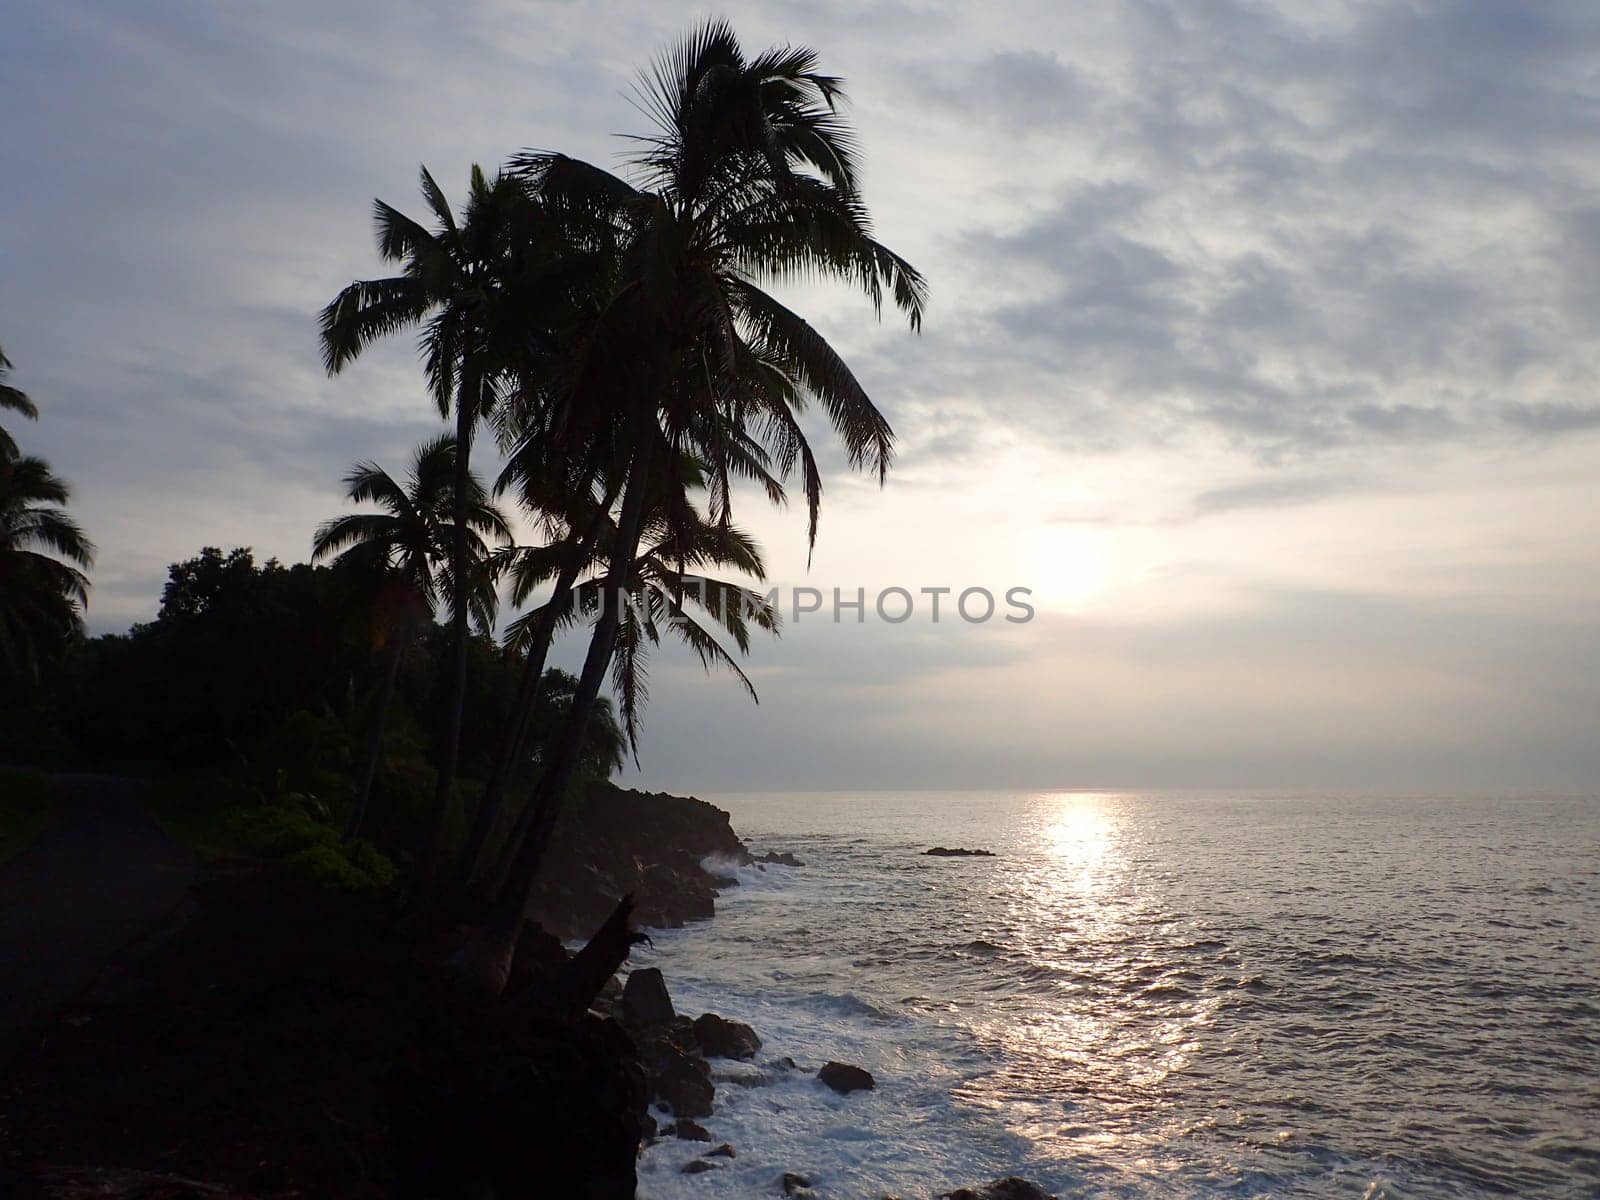 A beautiful sunrise over the ocean in Pahoa, Hawaii. The photo shows the gradient of orange and blue colors in the sky and the reflection of the sun on the water. The photo also shows the palm trees and the rocks on the sides of the ocean, creating a natural and scenic contrast. The photo is taken from a higher vantage point, looking down at the ocean.